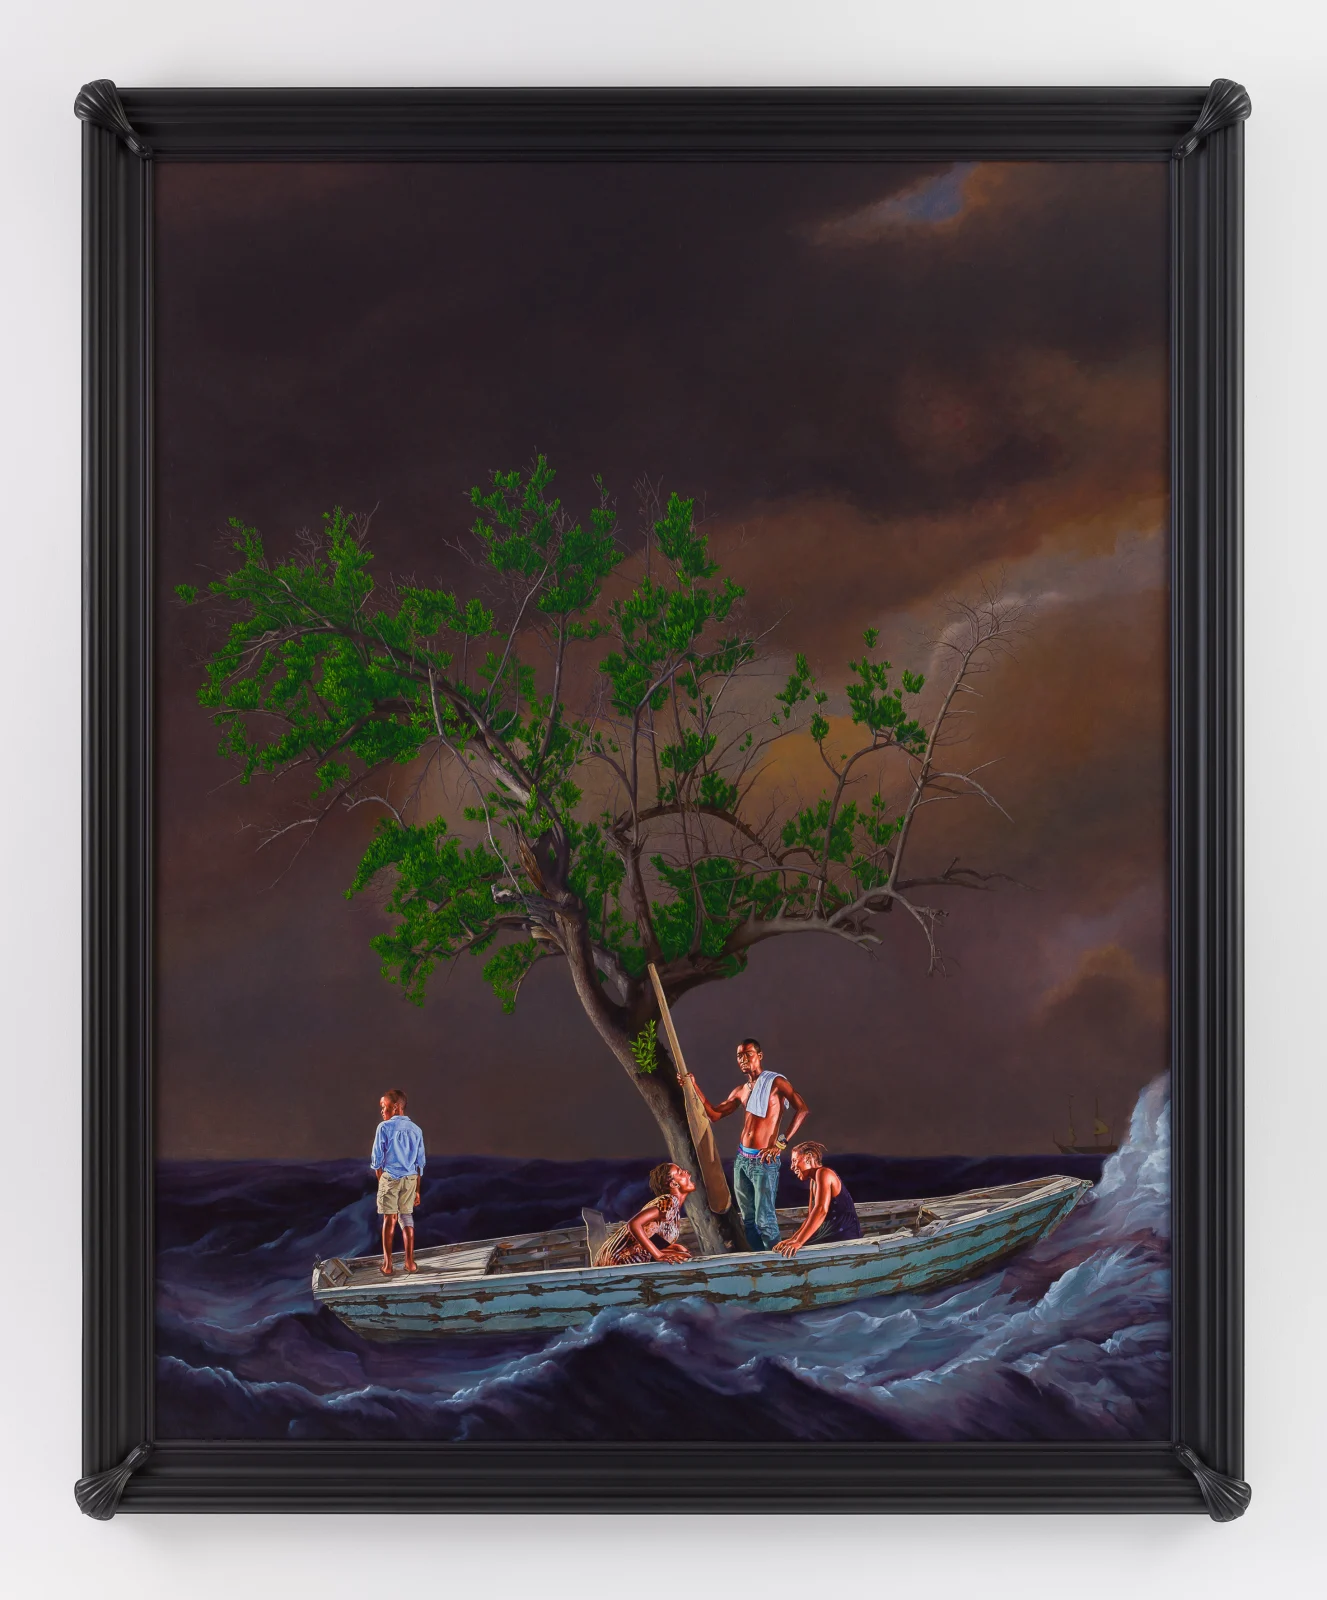 <p>Kehinde Wiley, 'Ship of Fools', 2017, Collection of the National Maritime Museum, London</p>